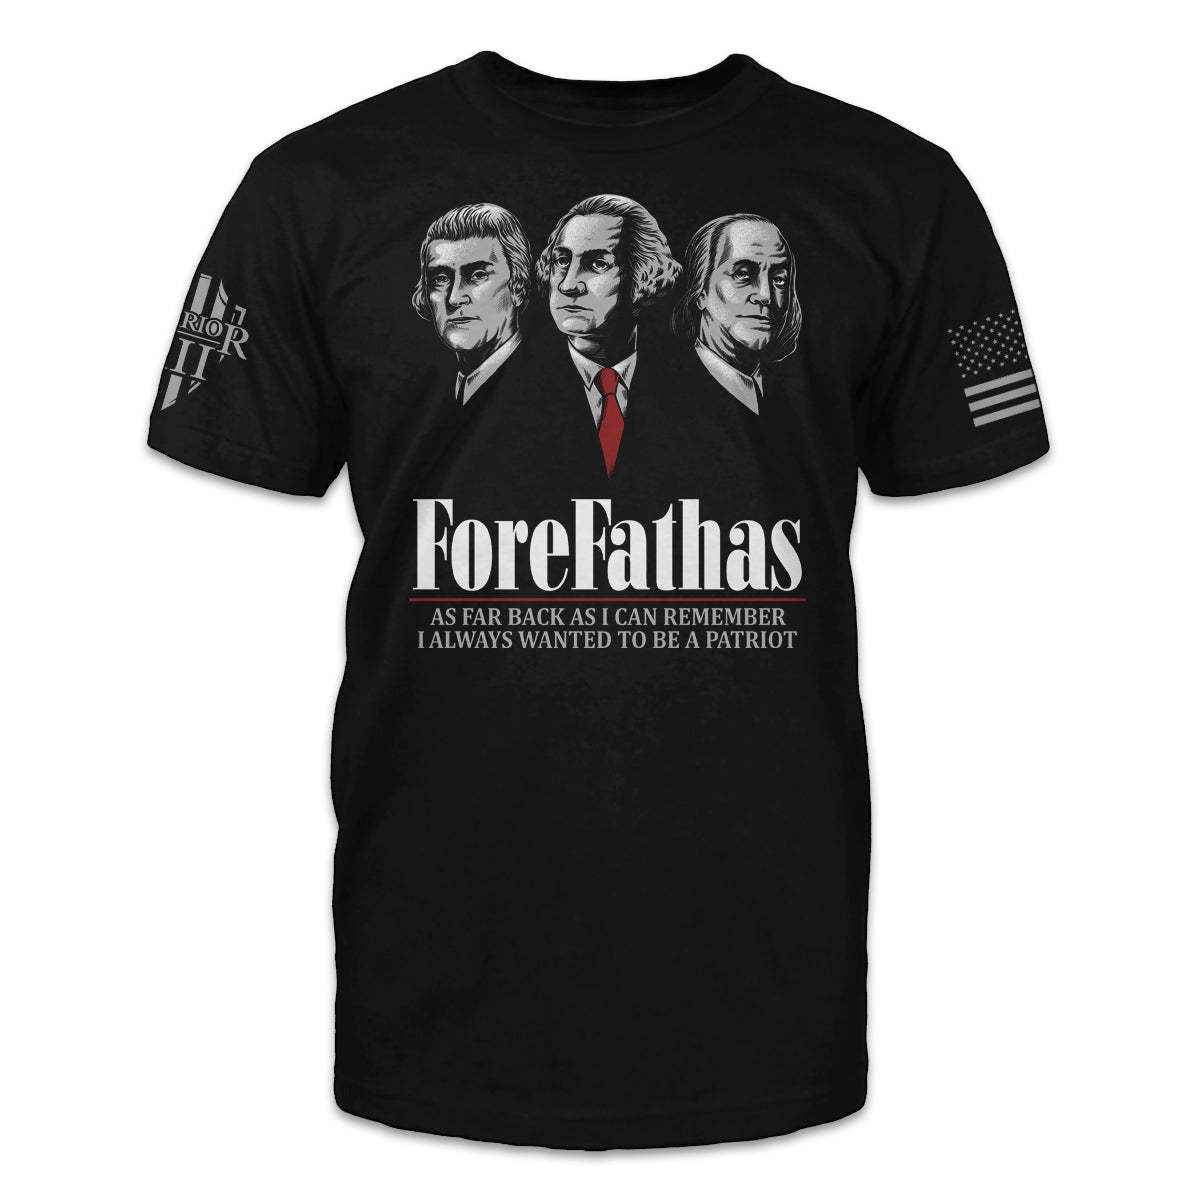 A black t-shirt with the words "ForeFathas - As far back as I can remember, I always wanted to be a patriot" with the 3 founding fathers printed on the front of the shirt.